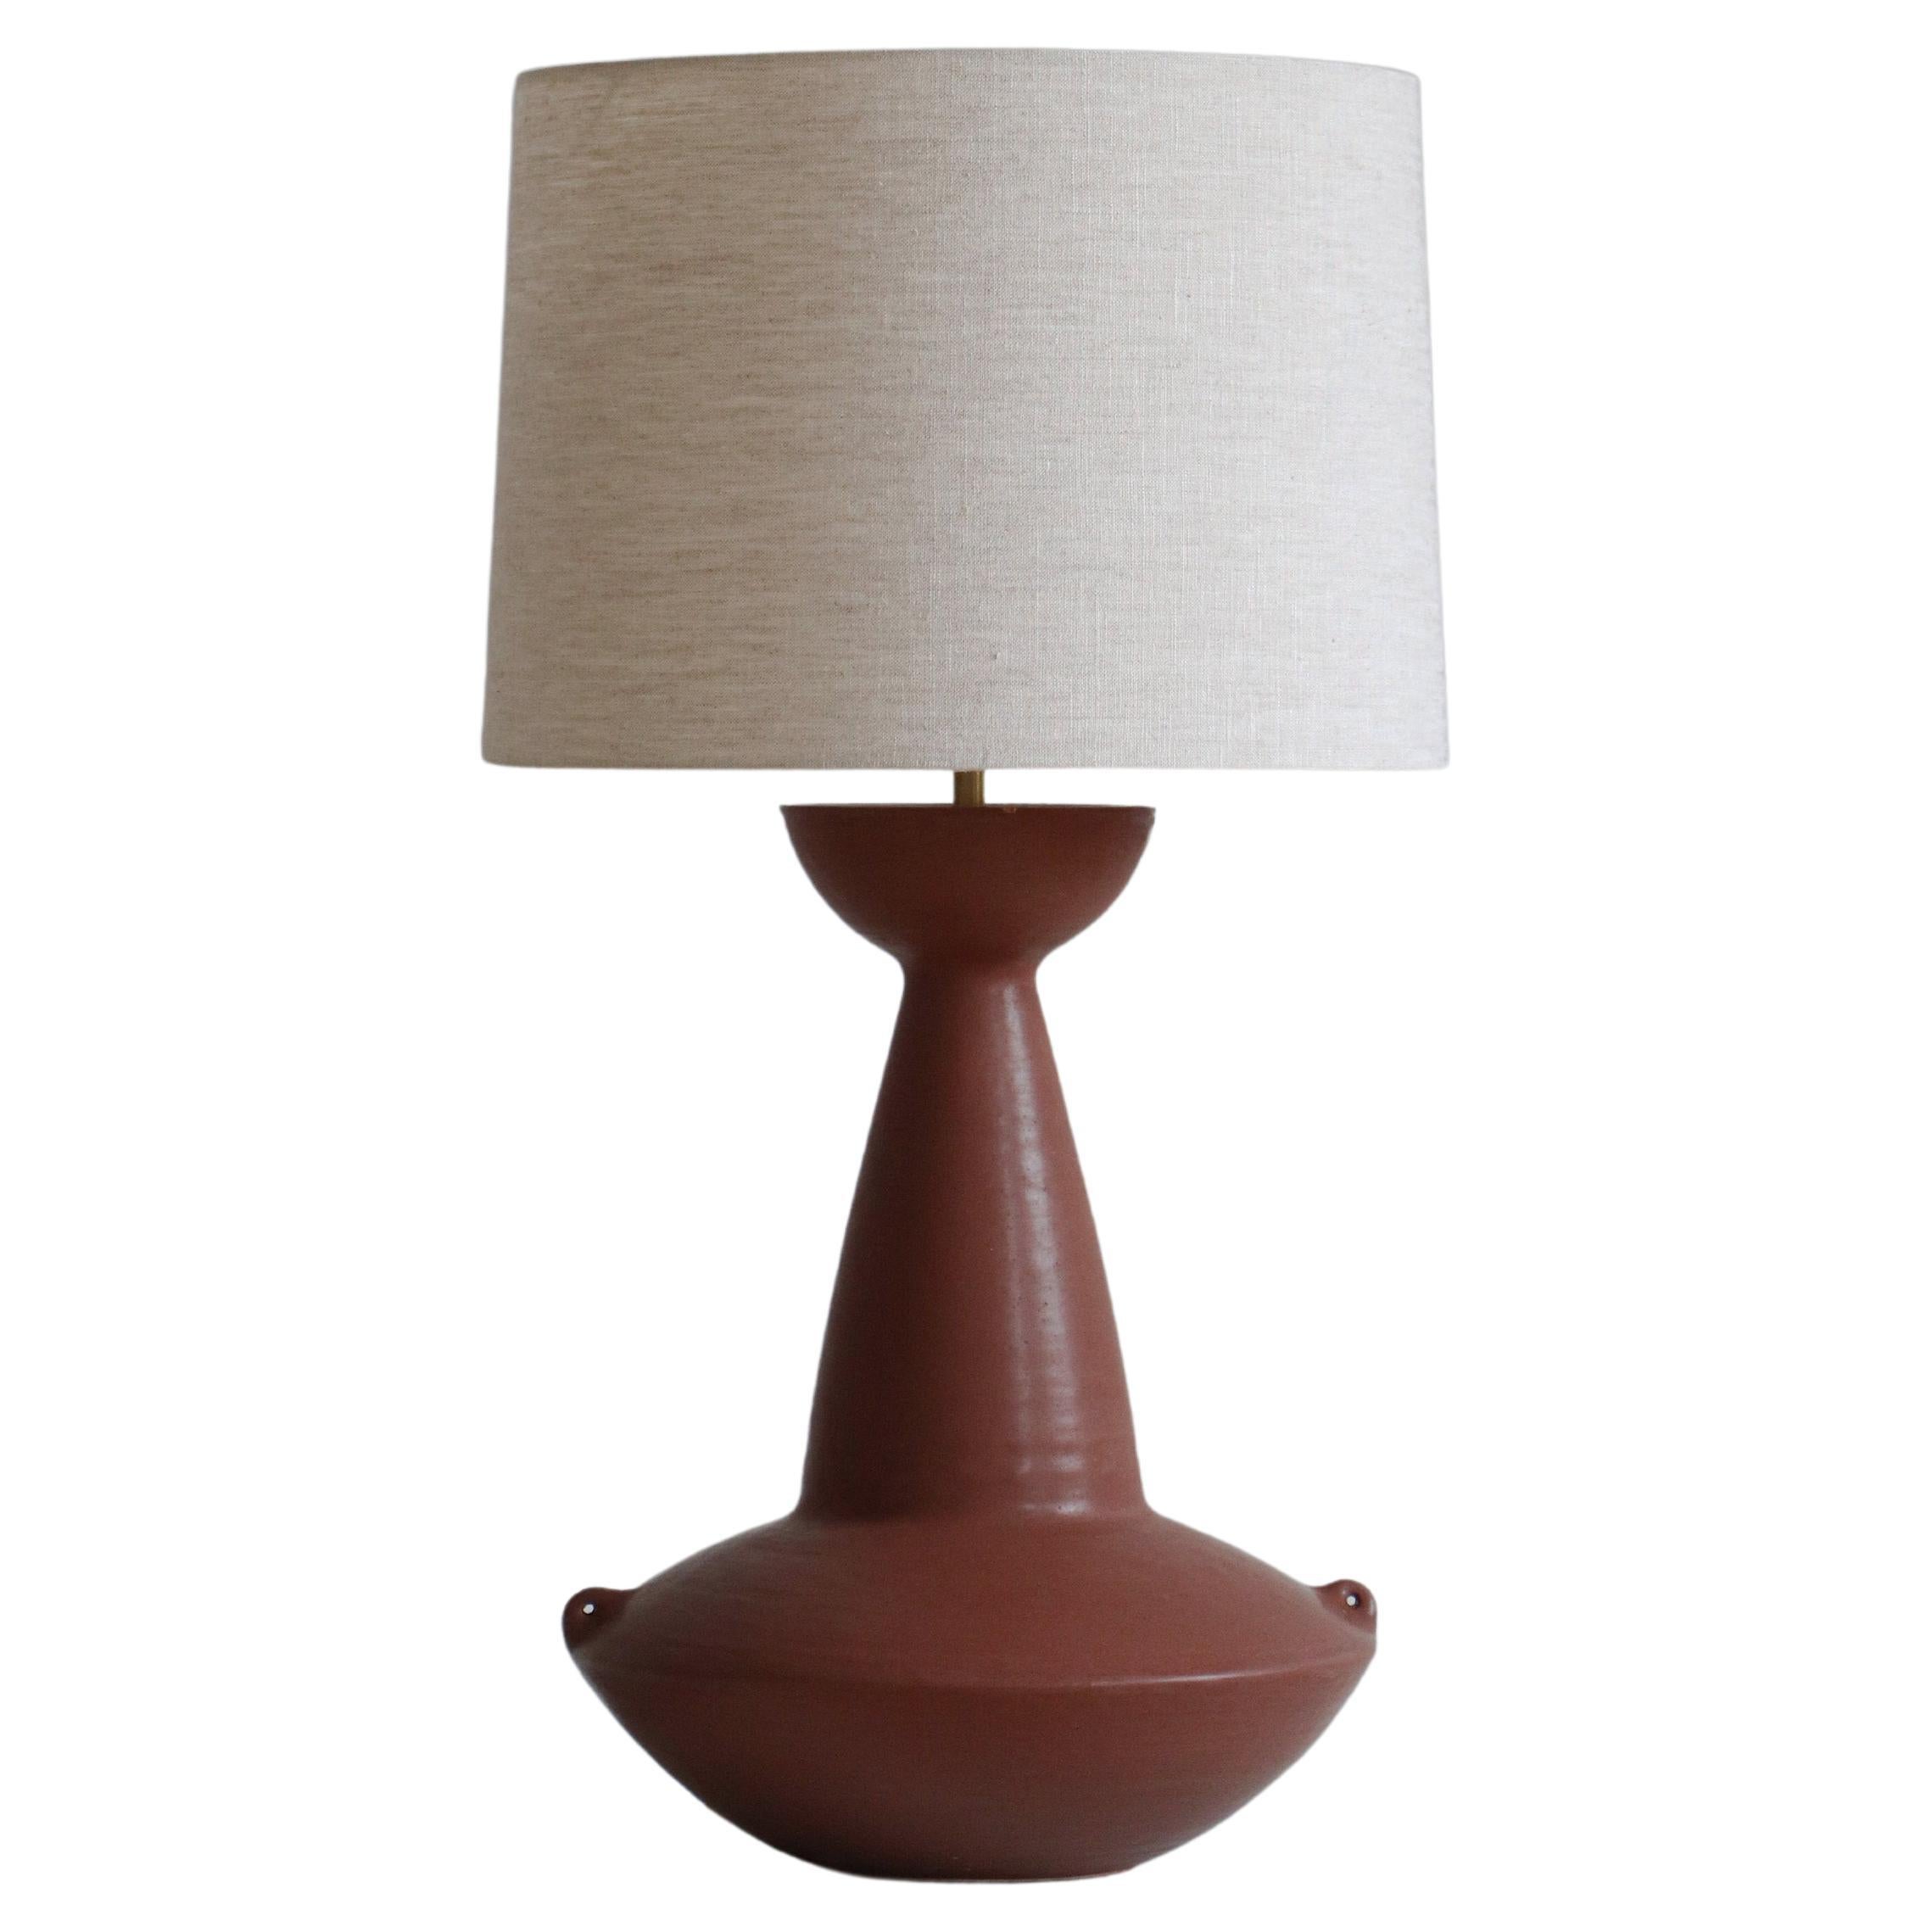 Chestnut Claudius Table Lamp by  Danny Kaplan Studio For Sale